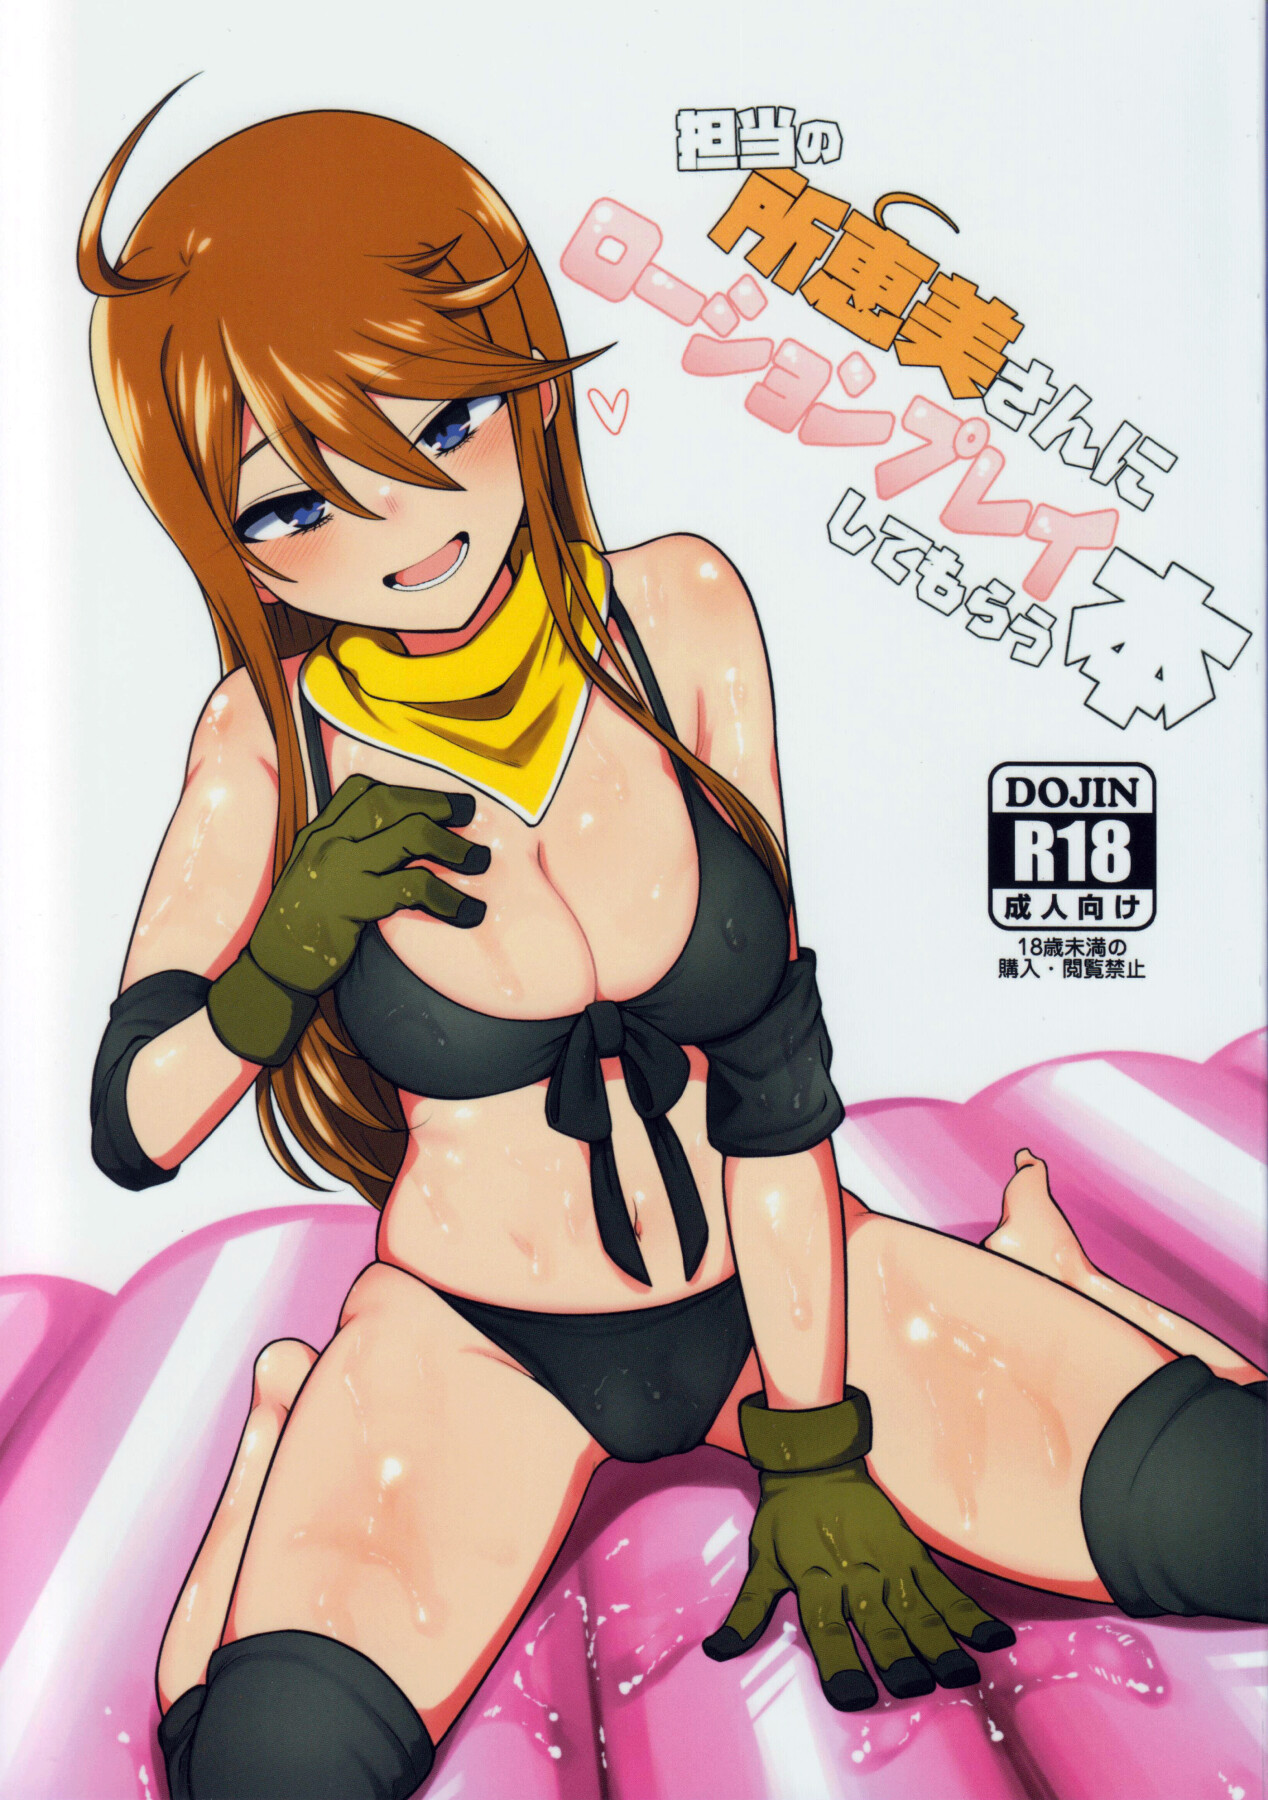 Hentai Manga Comic-Having Tokoro Megumi, Who I'm In Charge Of, Do Some Lotion Play With Me-Read-1